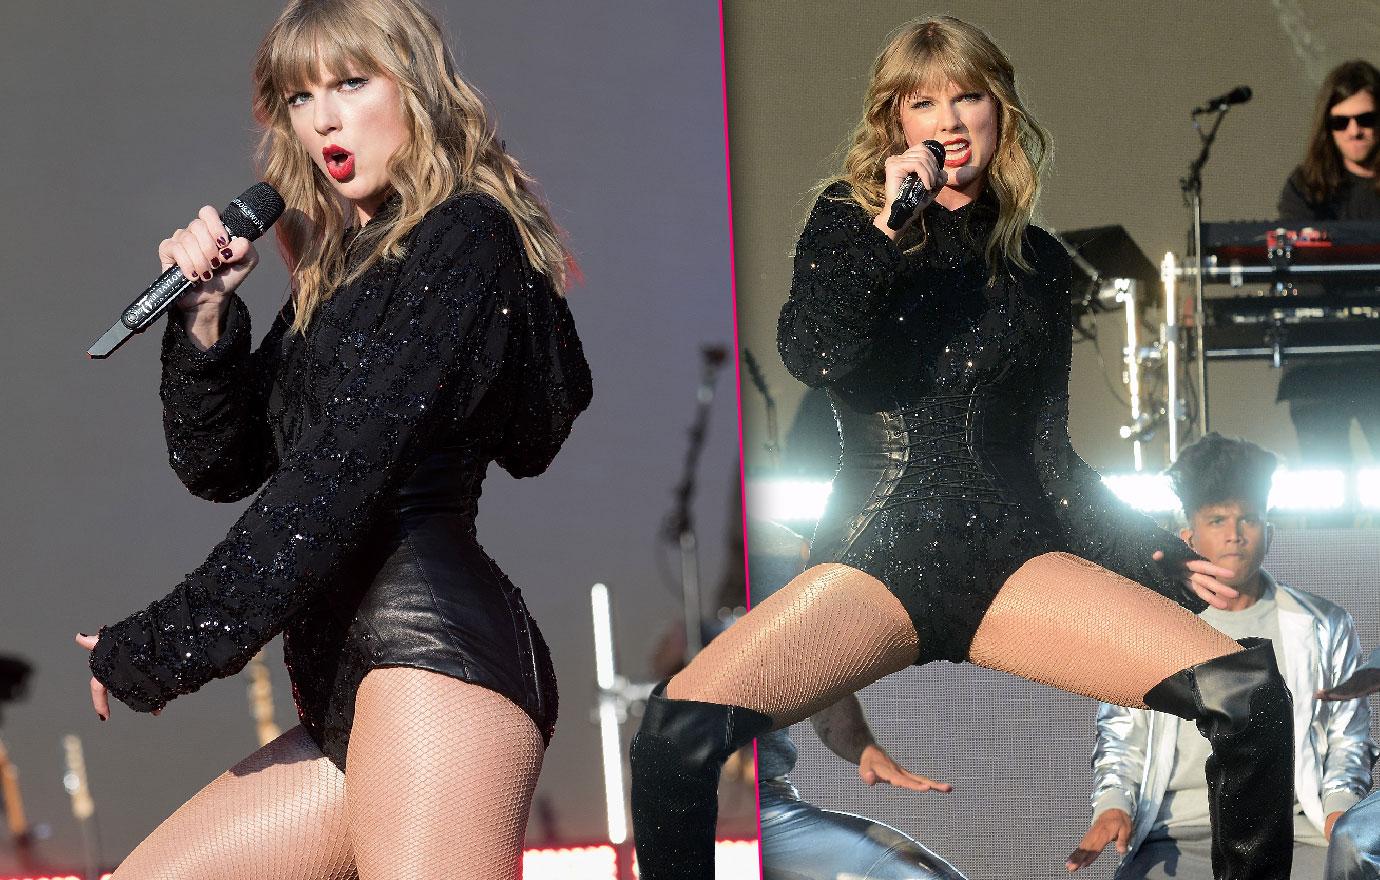 Taylor Swift gets super sexy on stage in racy outfit while performing in Gr...